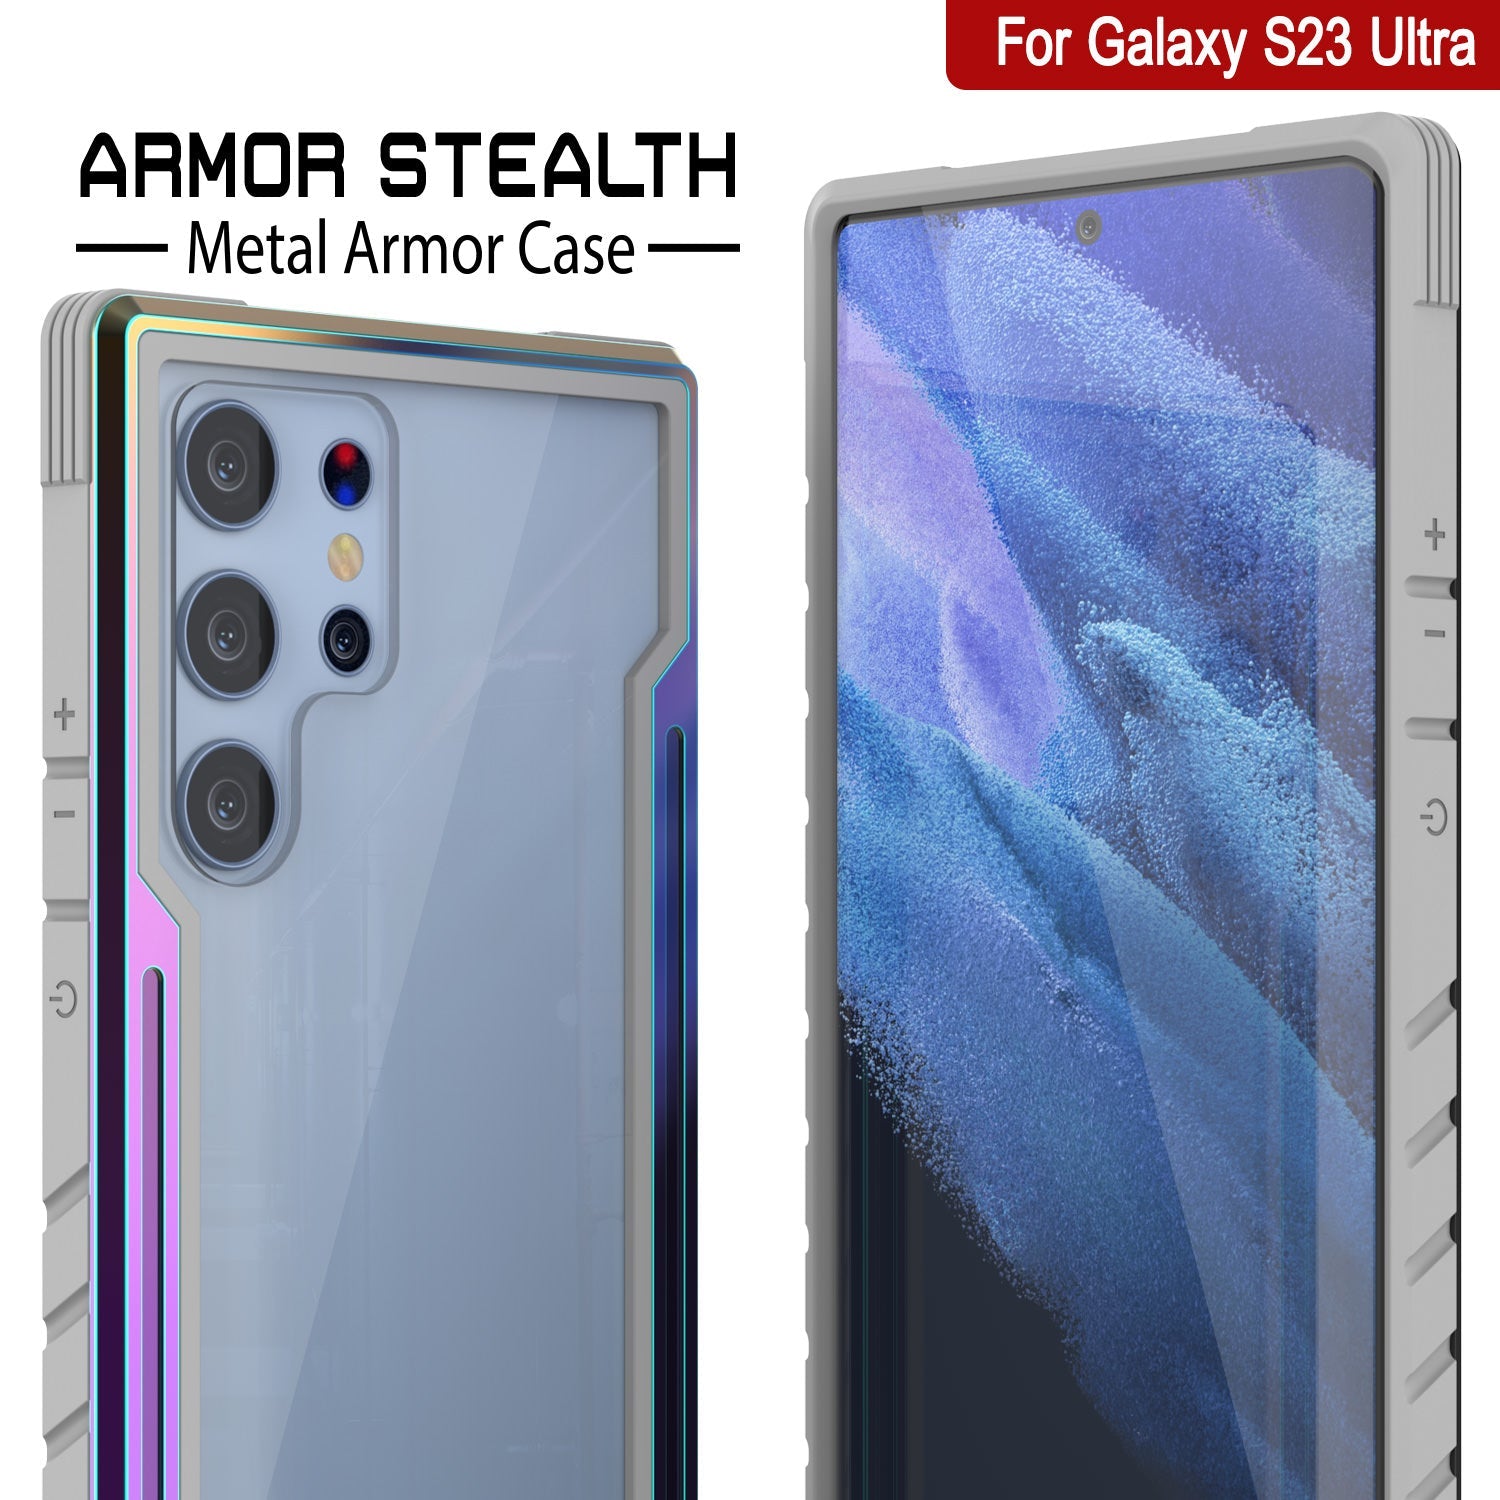 Punkcase S23 Ultra Armor Stealth Case Protective Military Grade Multilayer Cover [Rainbow]